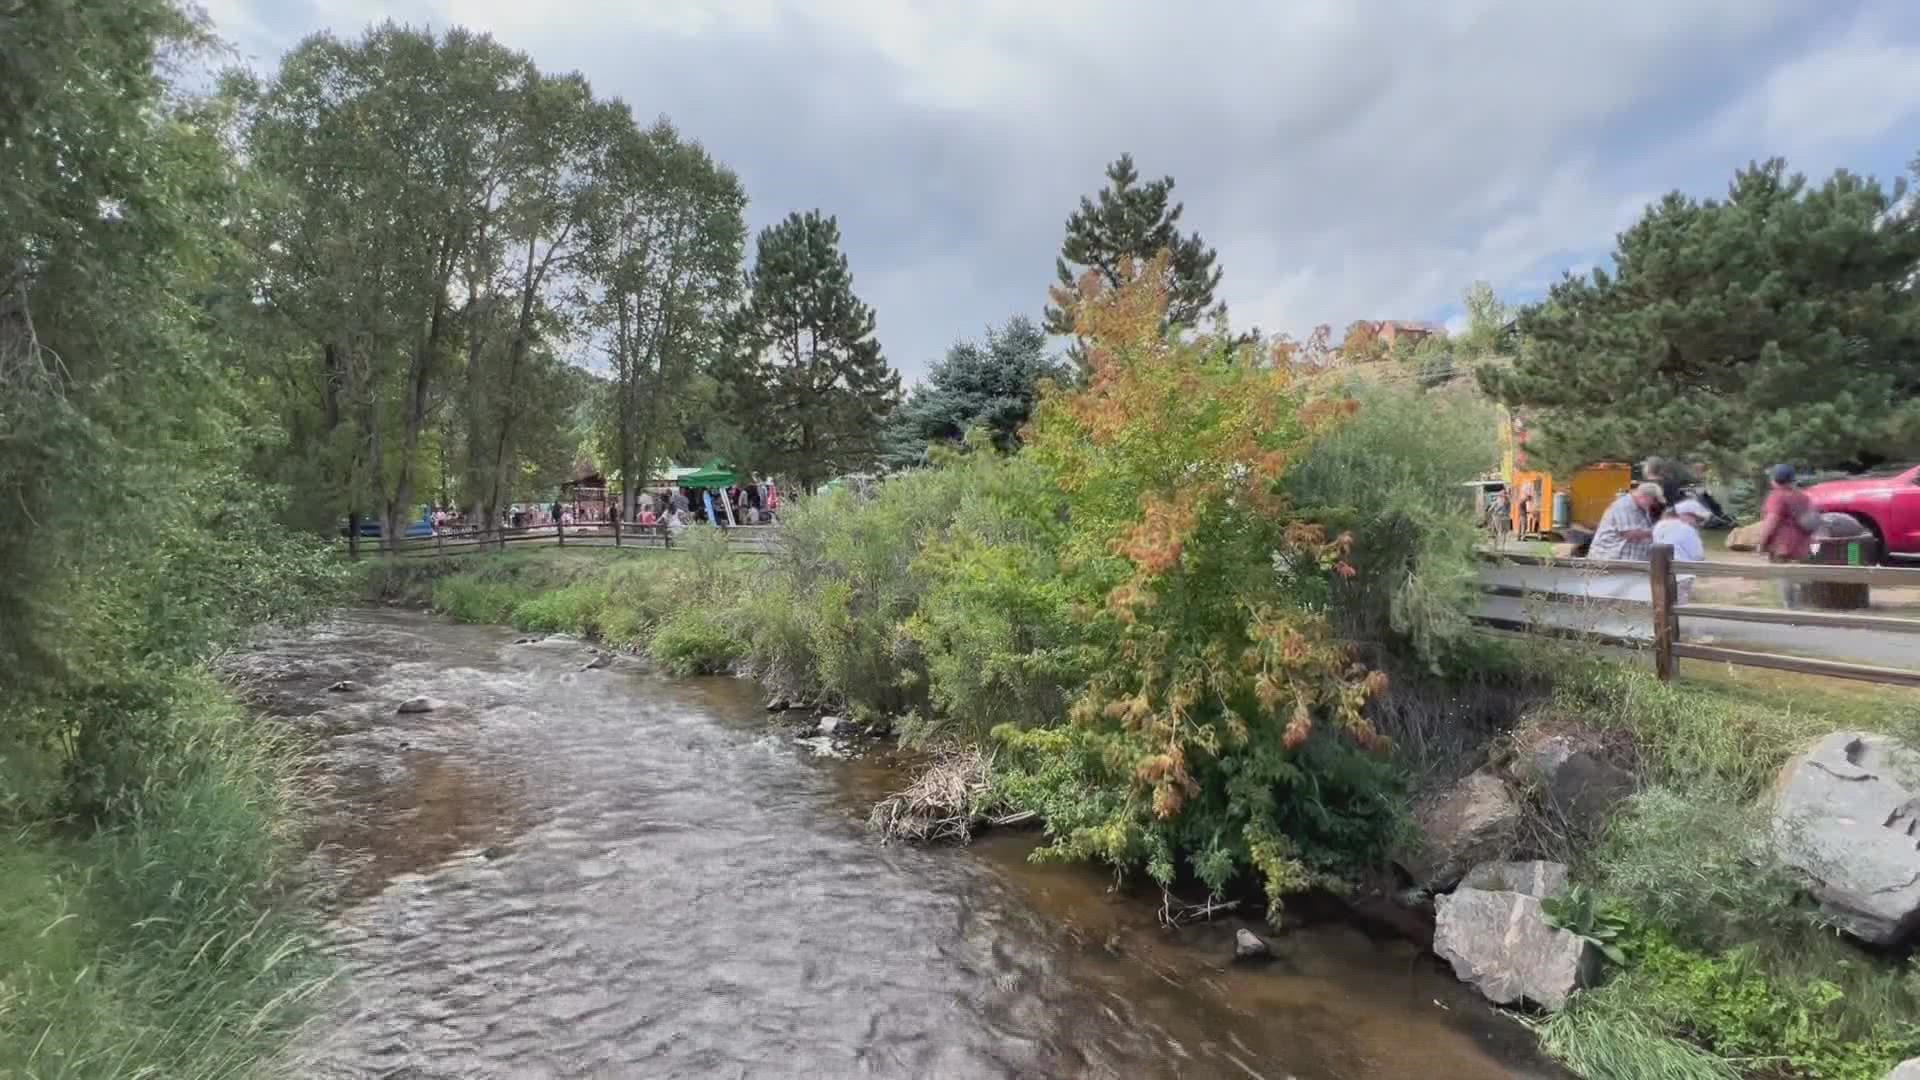 For 35 years, the public accessed Bear Creek in Kittredge through a plot of land next to a community park. A woman cut off creek access, claiming the land is hers.